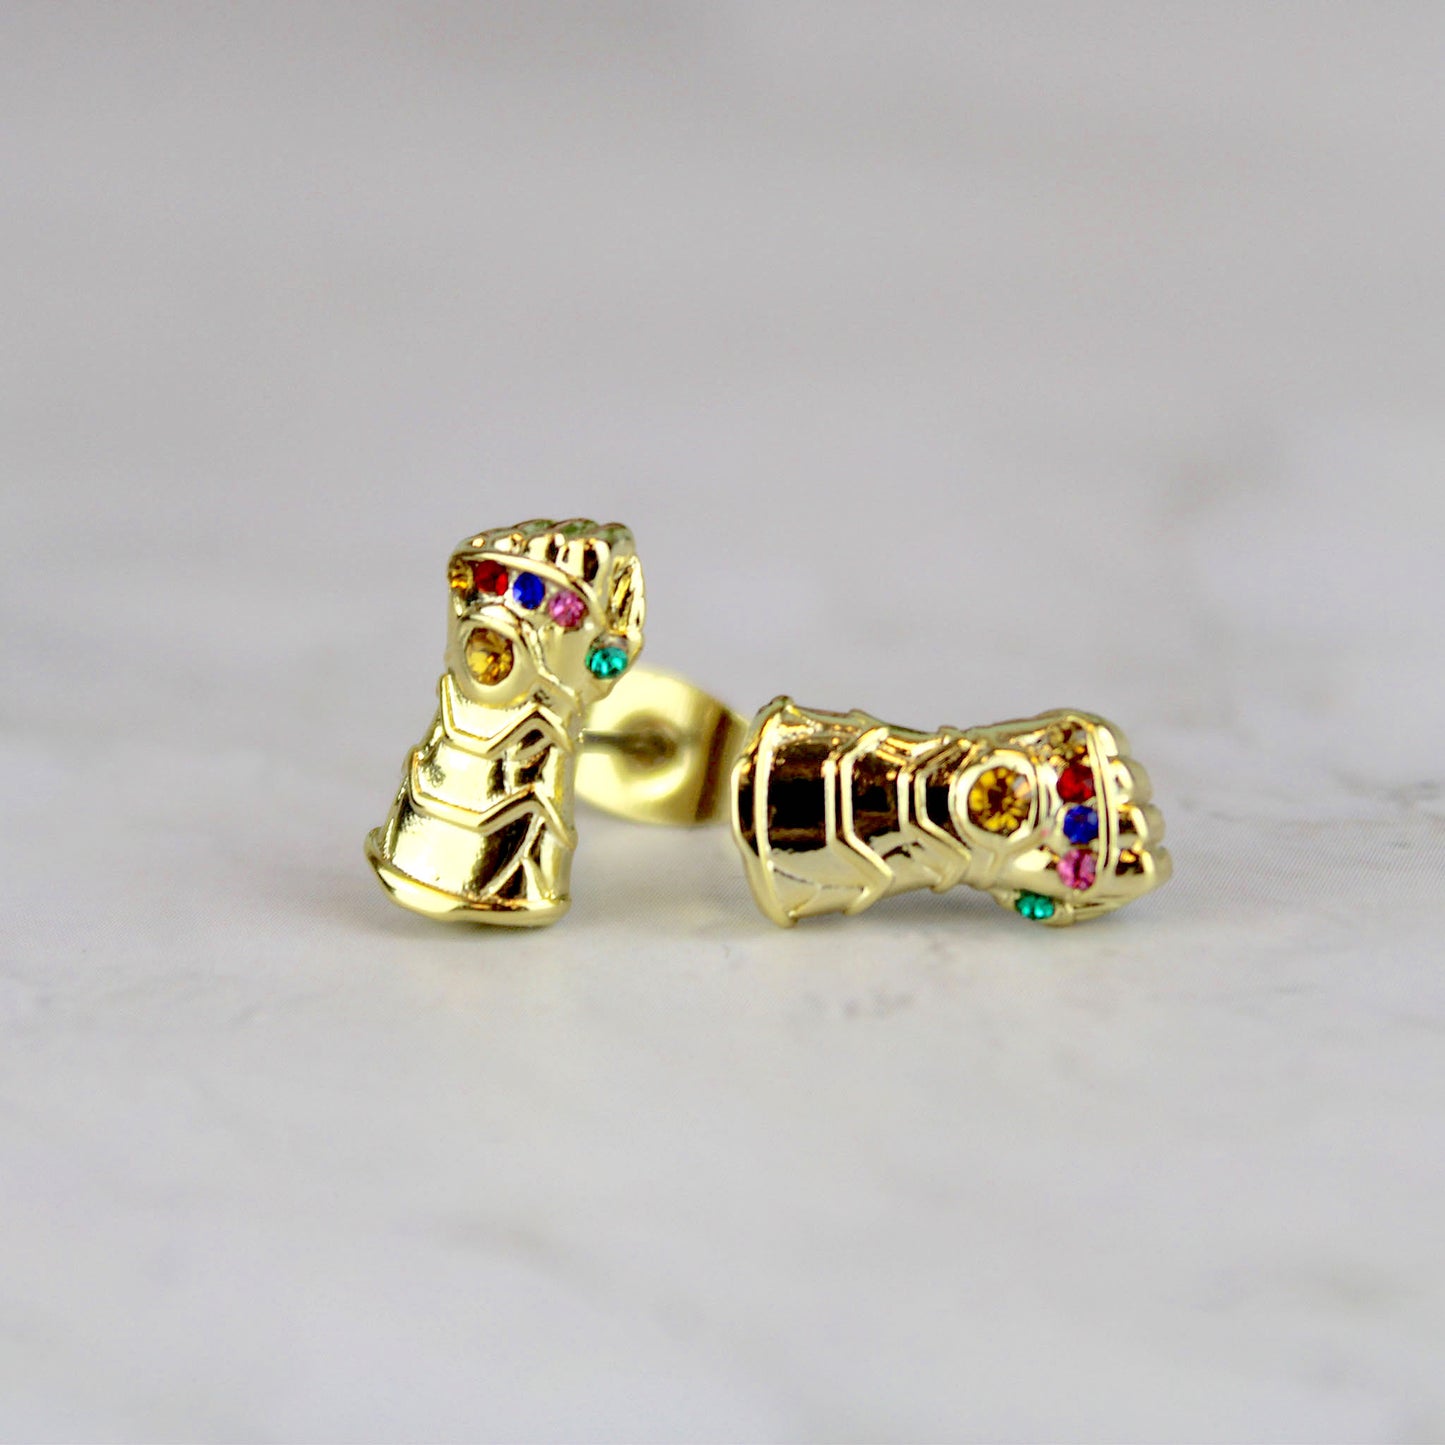 Thanos Infinity Gauntlet (Marvel) Gold Plated Crystal Stud Earrings